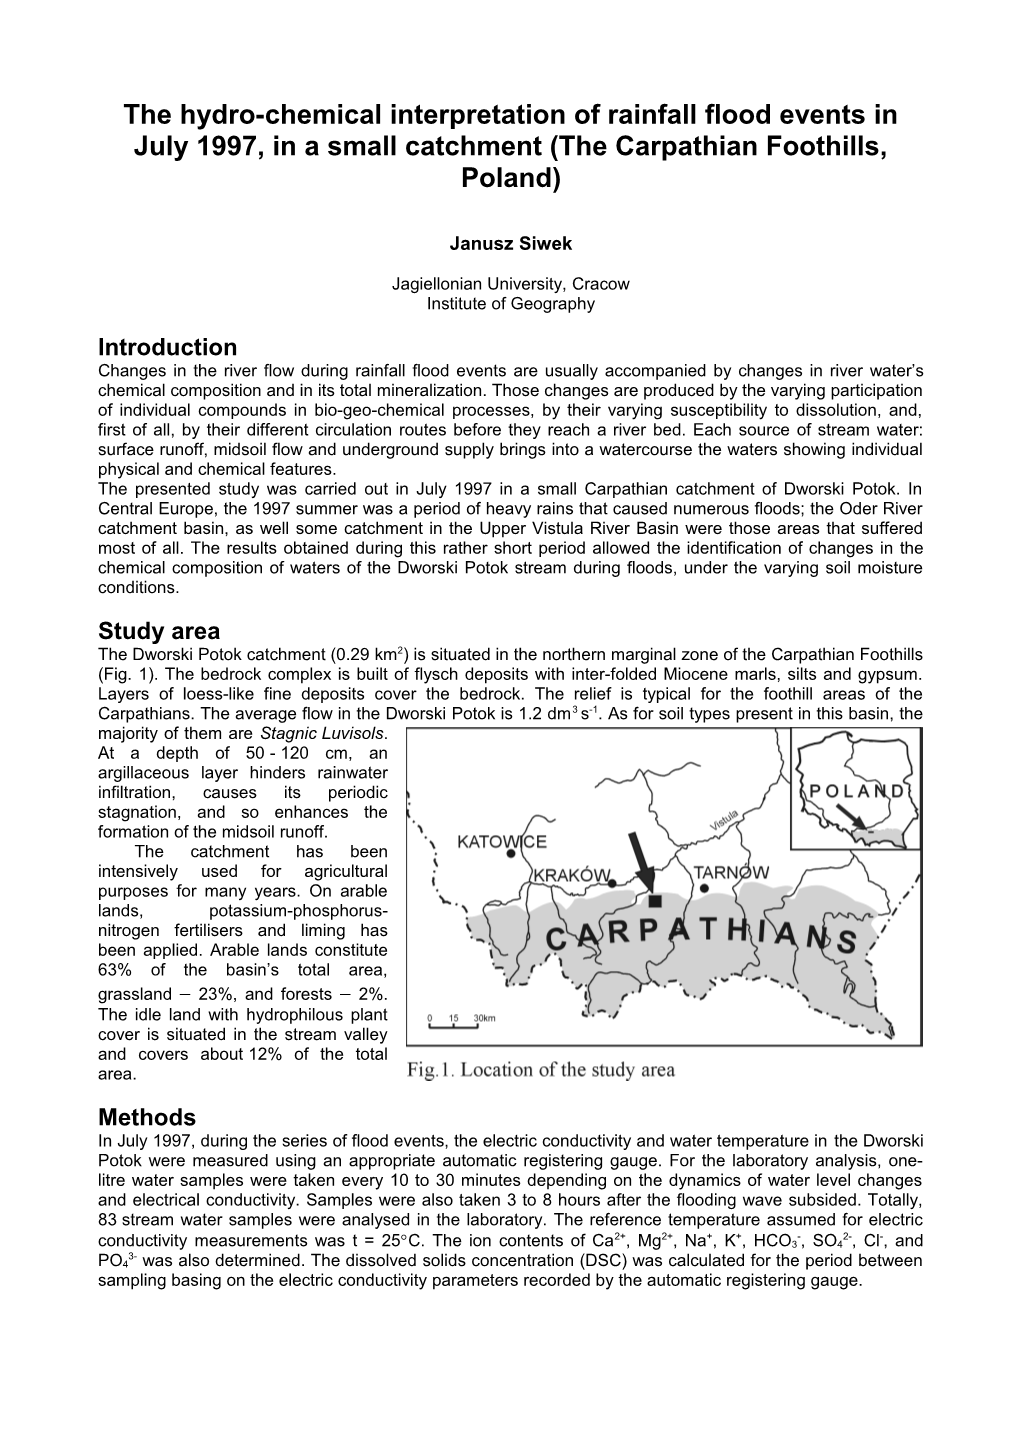 The Hydro-Chemical Interpretation of Rainfall Flood Events in July 1997, in a Small Catchment